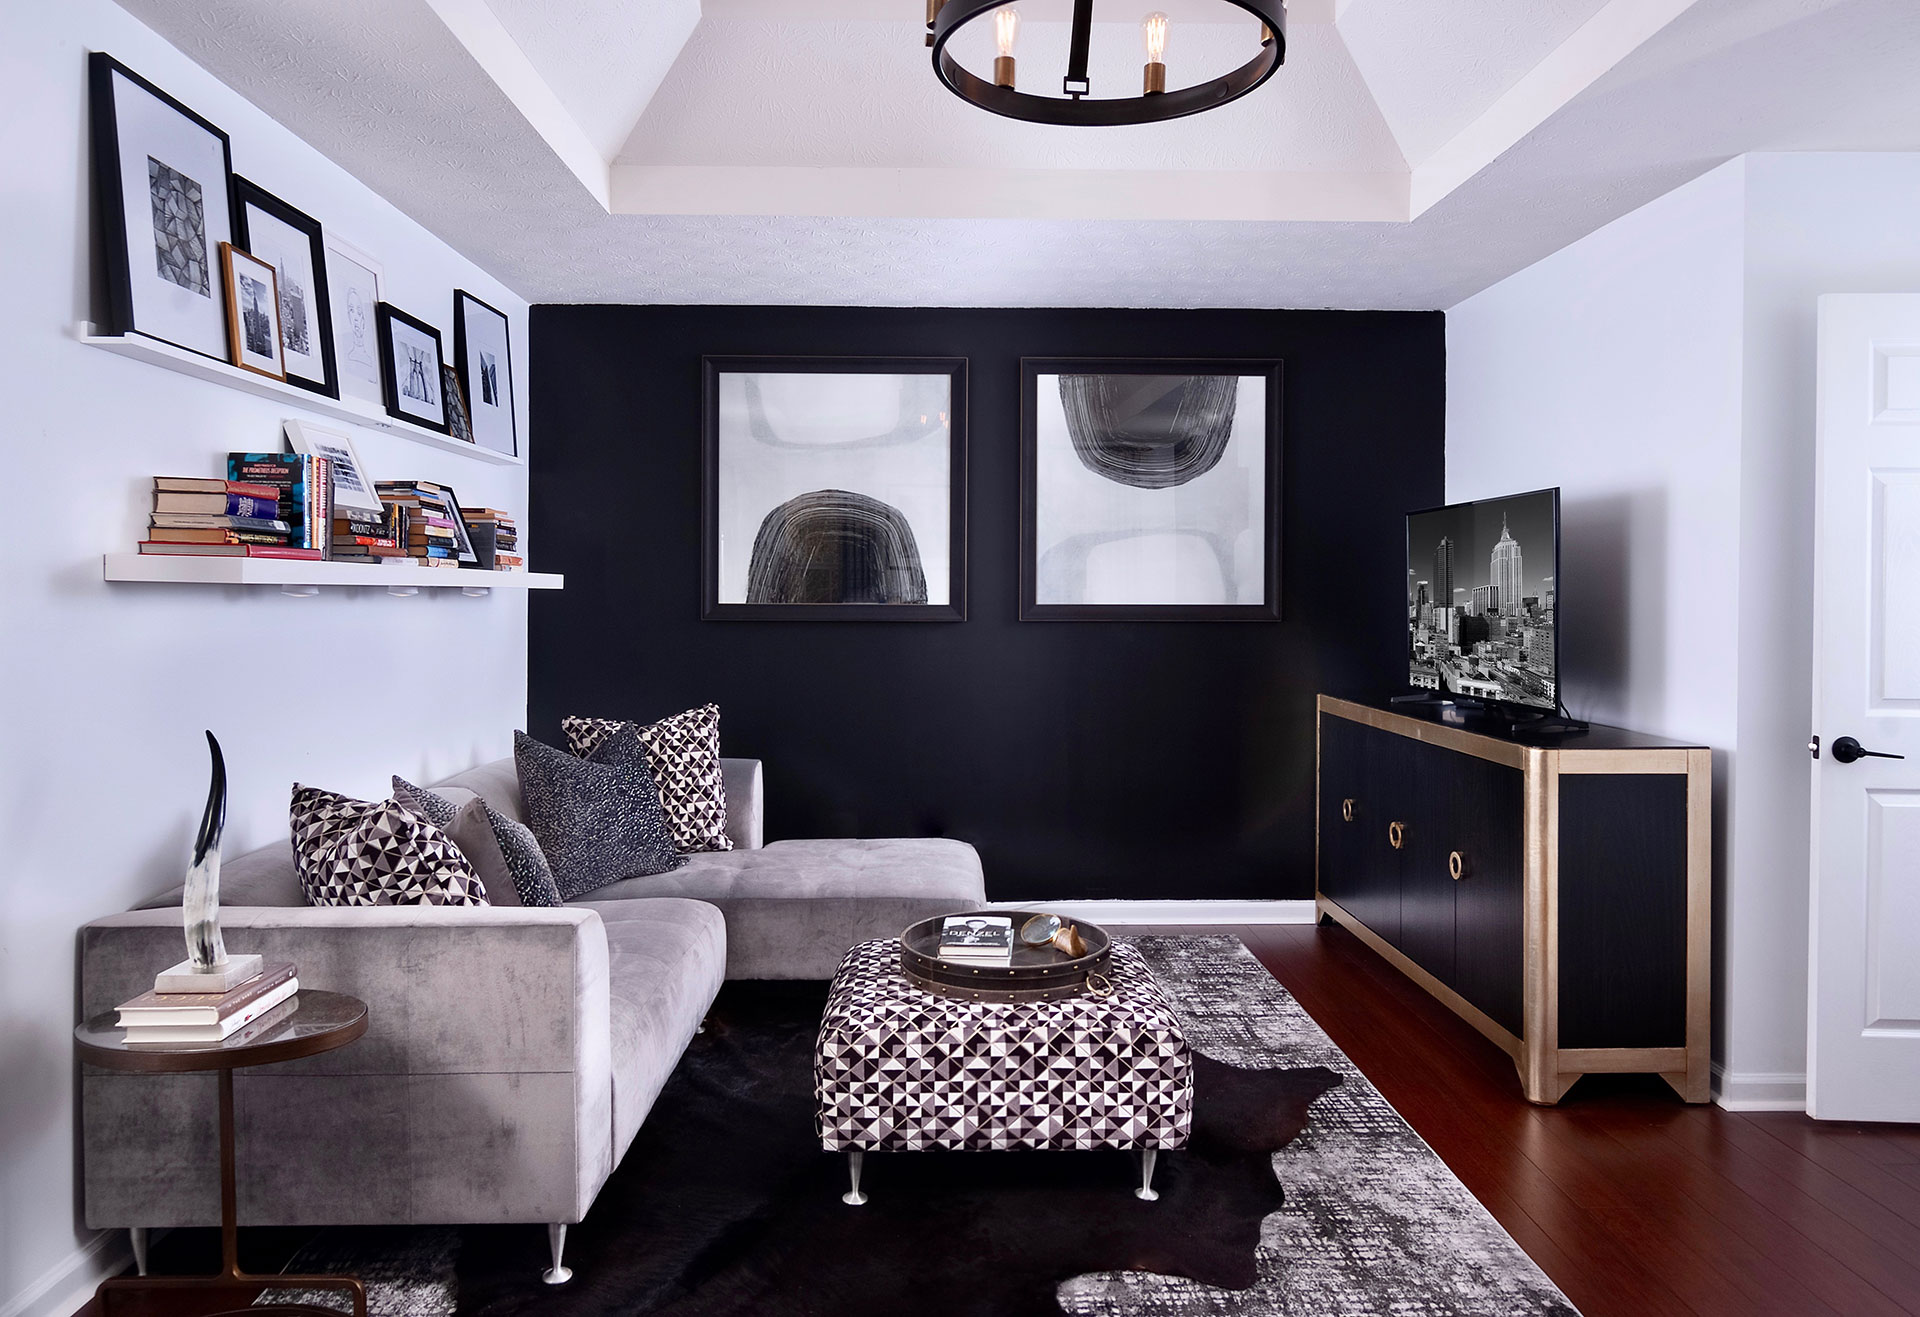 How You Can Decorate With Black